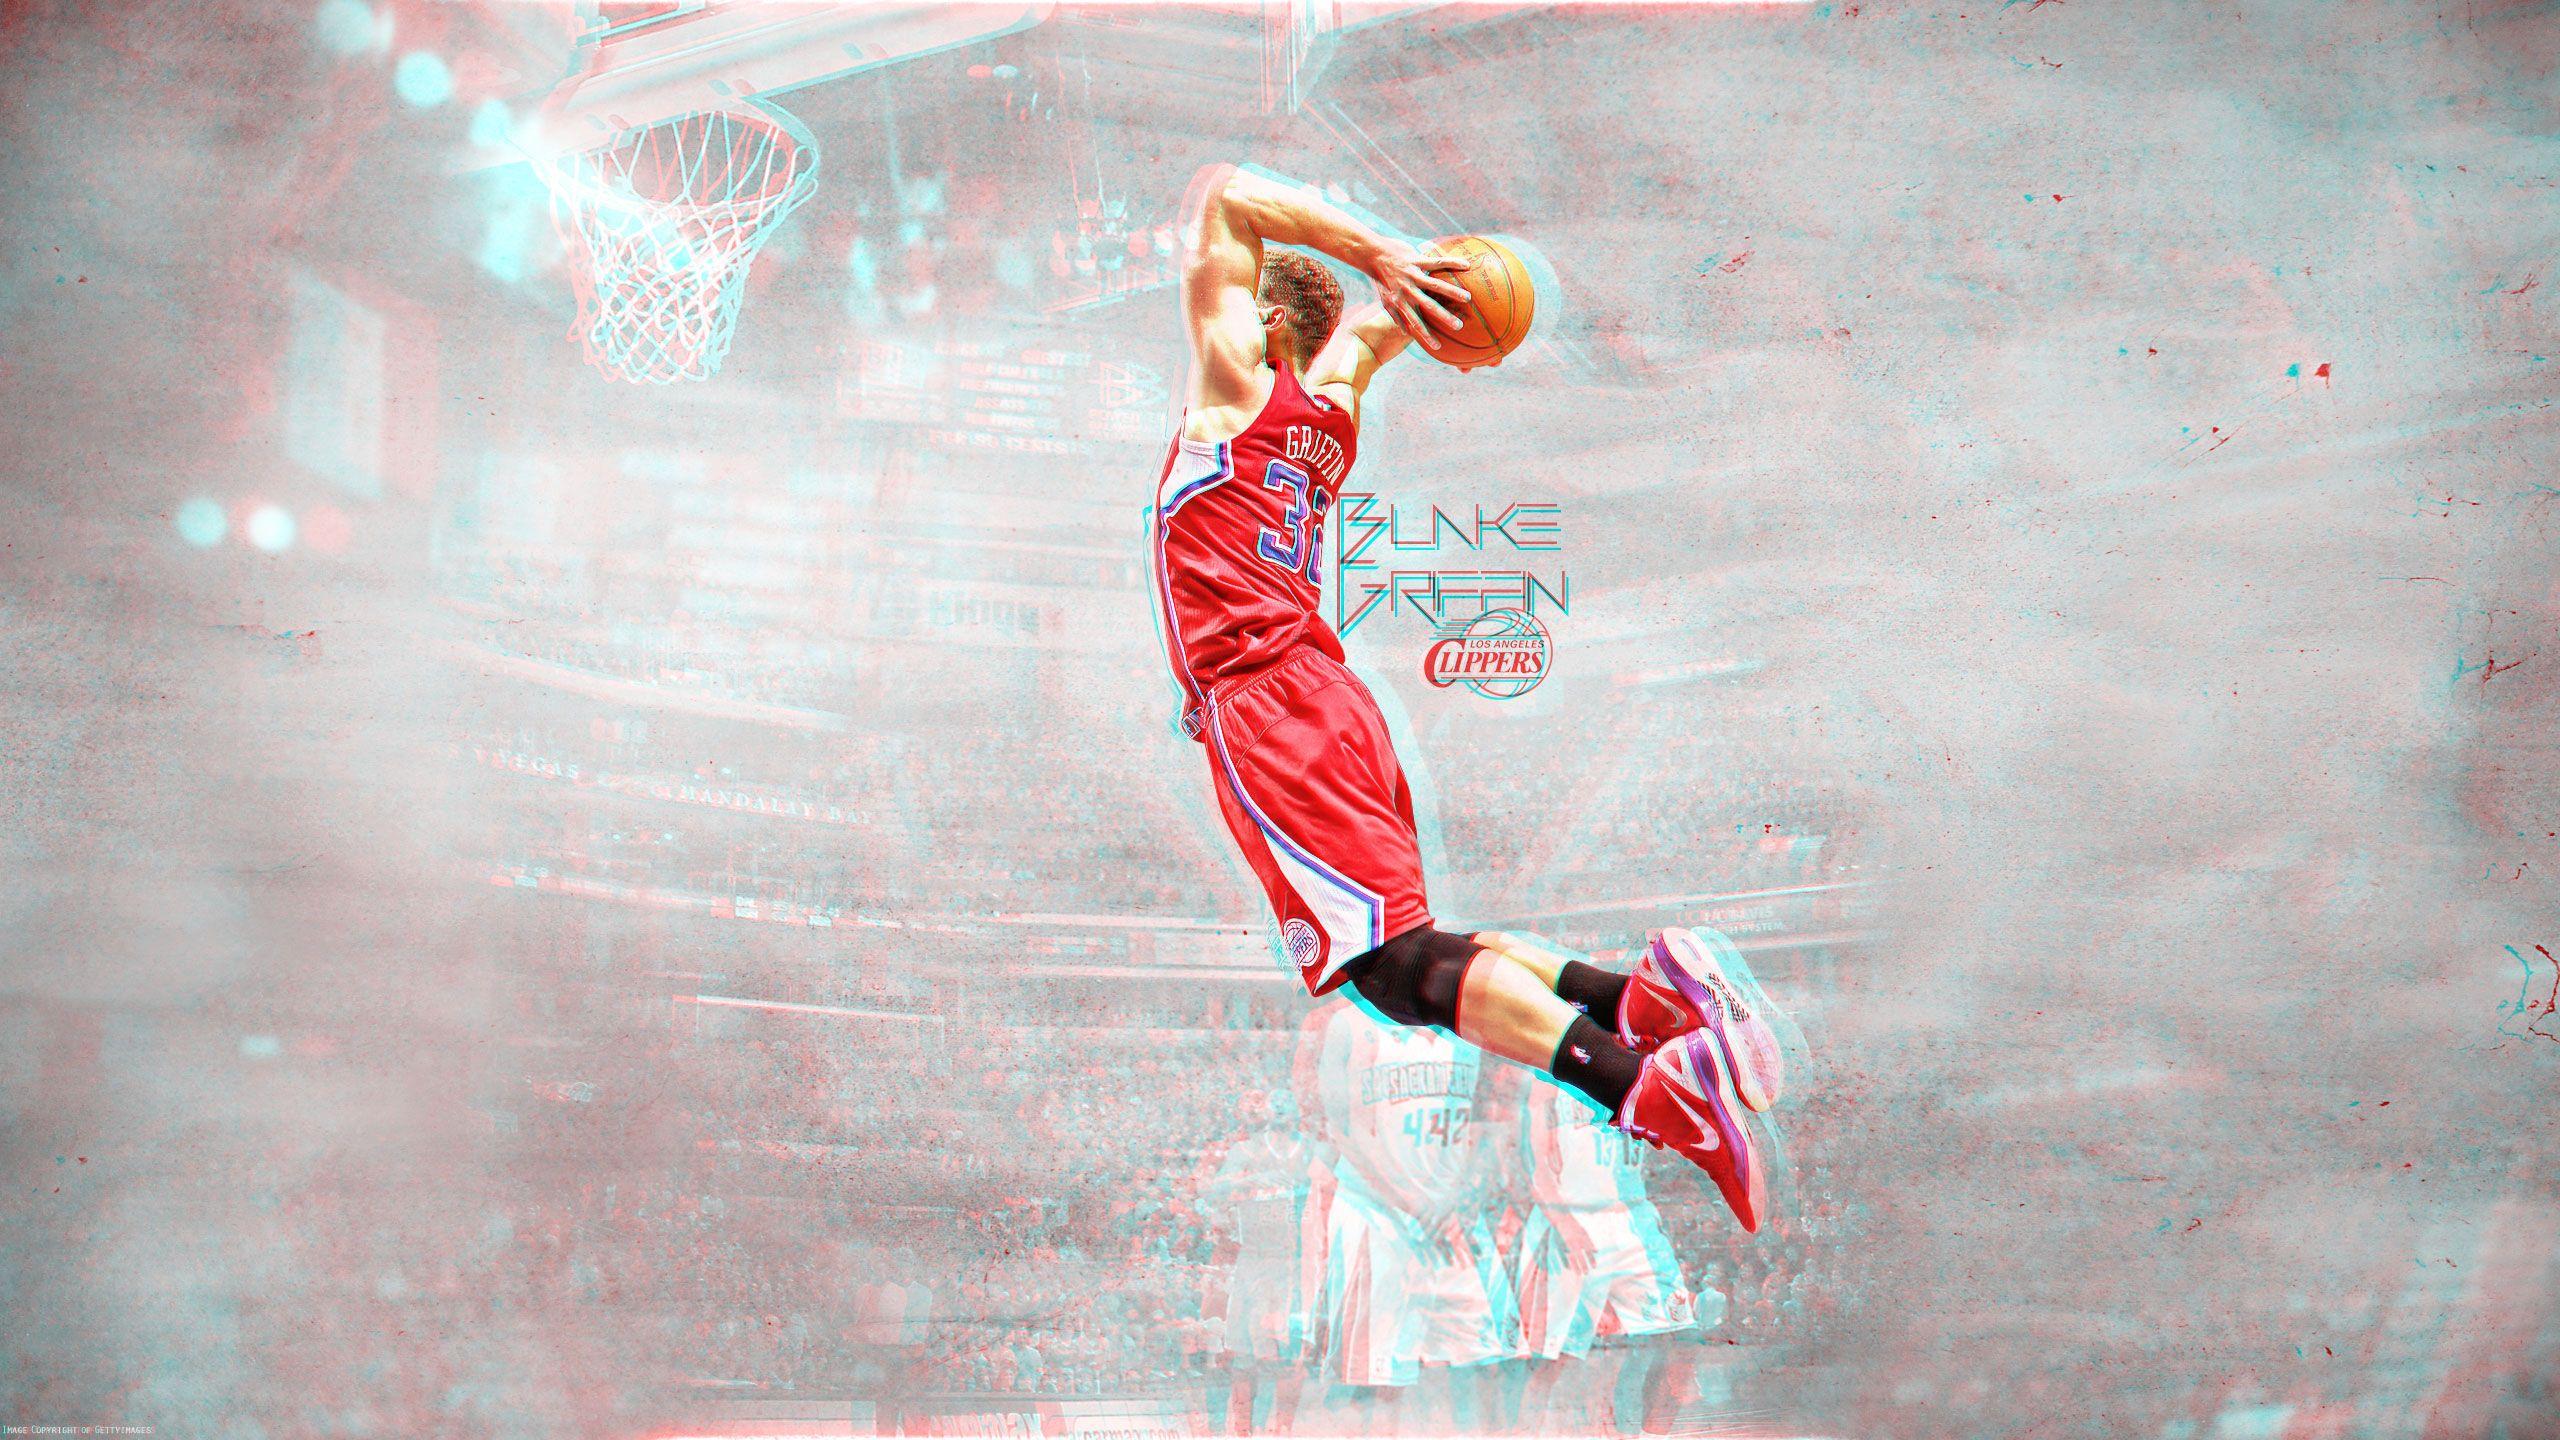 Awesome Blake Griffin Wallpaper 17125 2560x1440 px